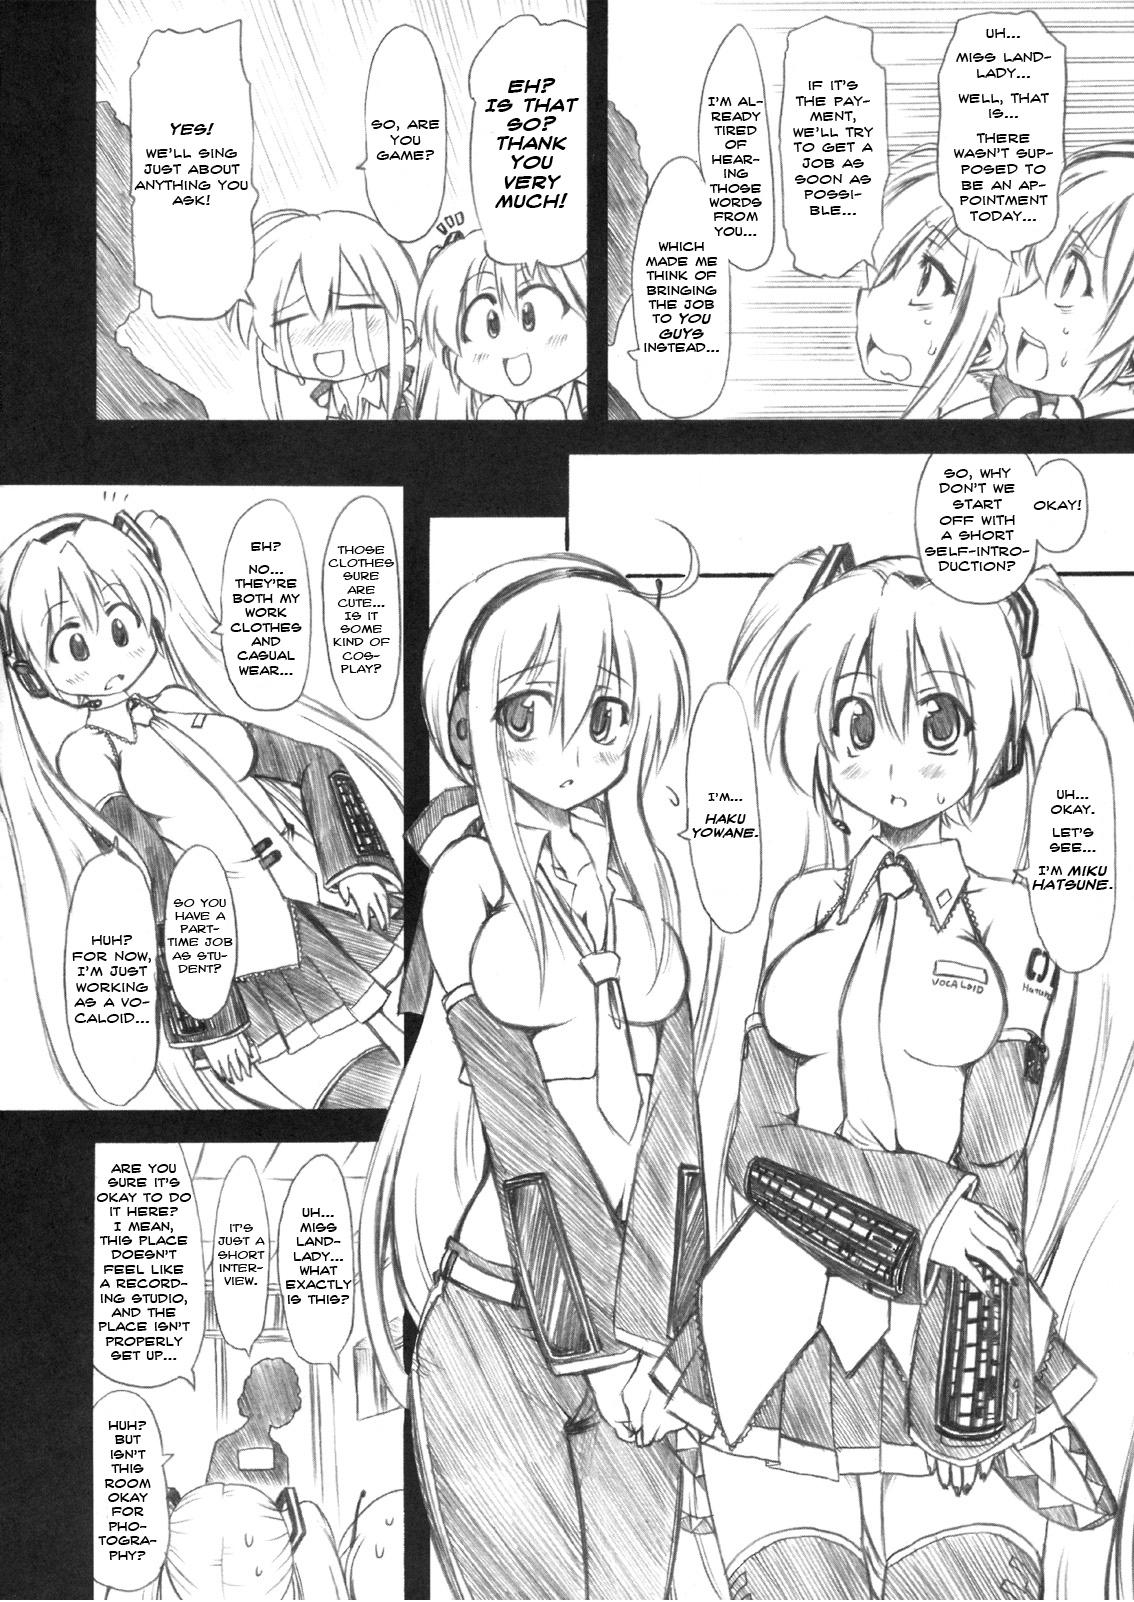 Maduro Sweet Room | Chic & Room - Vocaloid Bj - Page 5